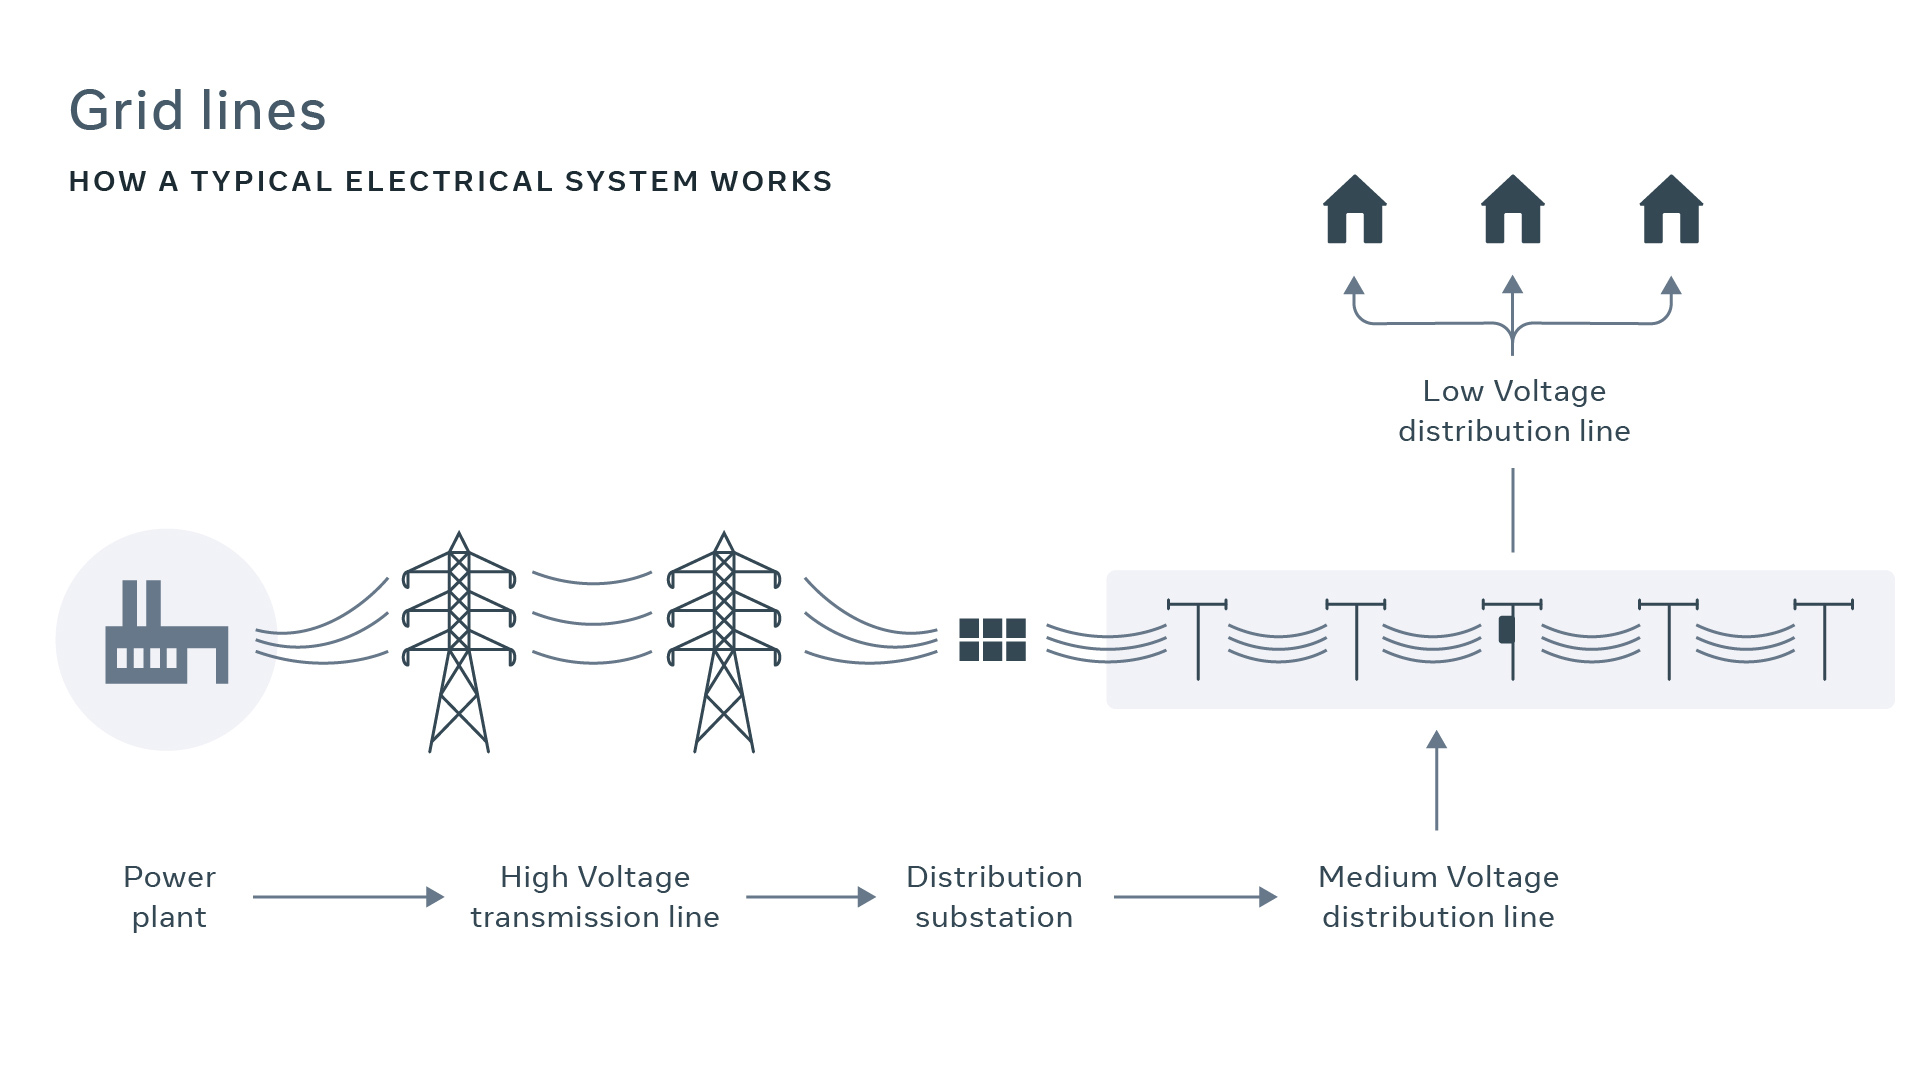 Making aerial fiber deployment faster and more efficient by deploying fiber on live electrical grid lines